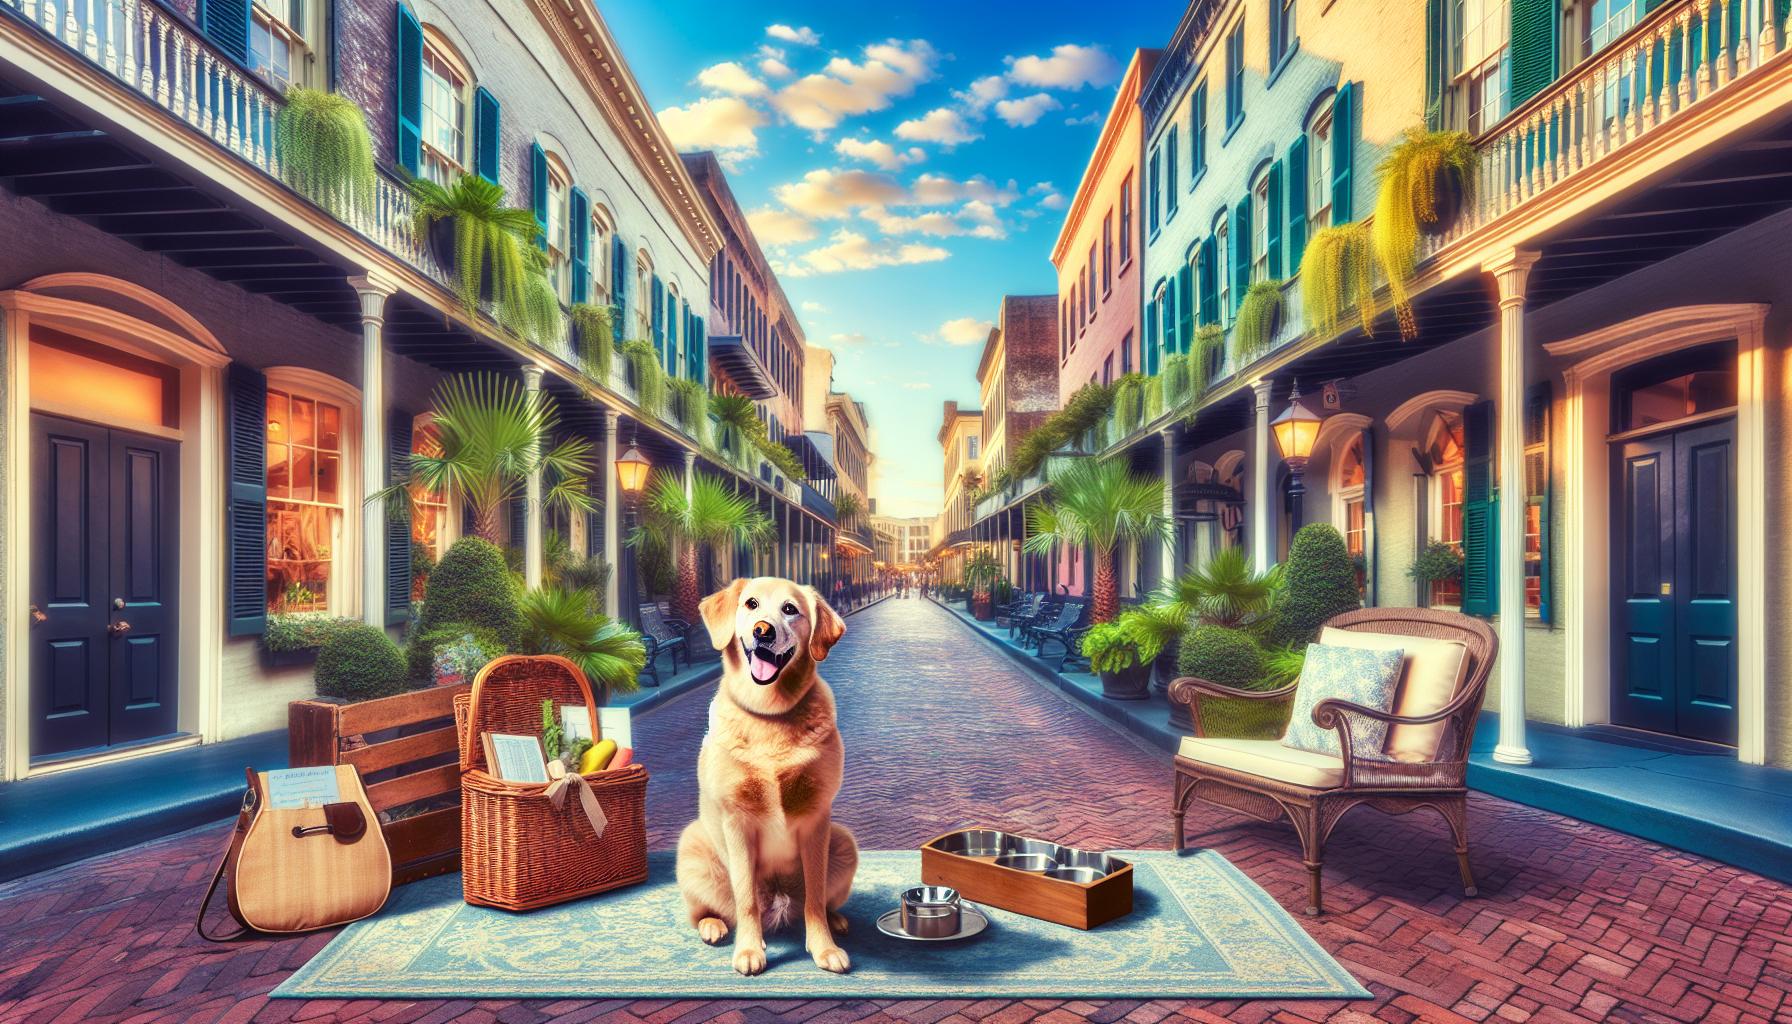 Discover Dog Friendly Hotel Charleston SC: Your Pooch's Perfect Vacation Spot